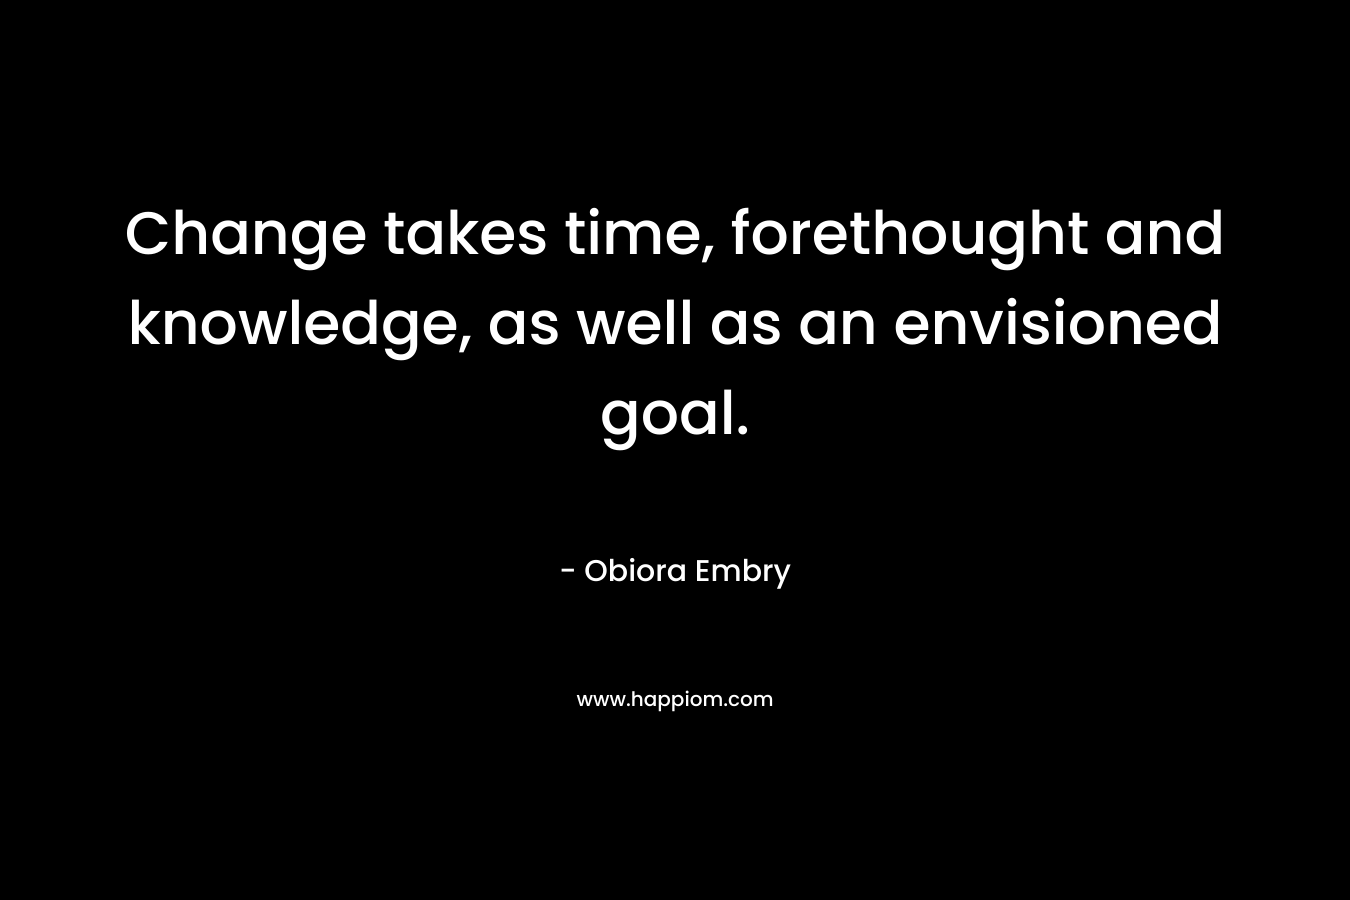 Change takes time, forethought and knowledge, as well as an envisioned goal.